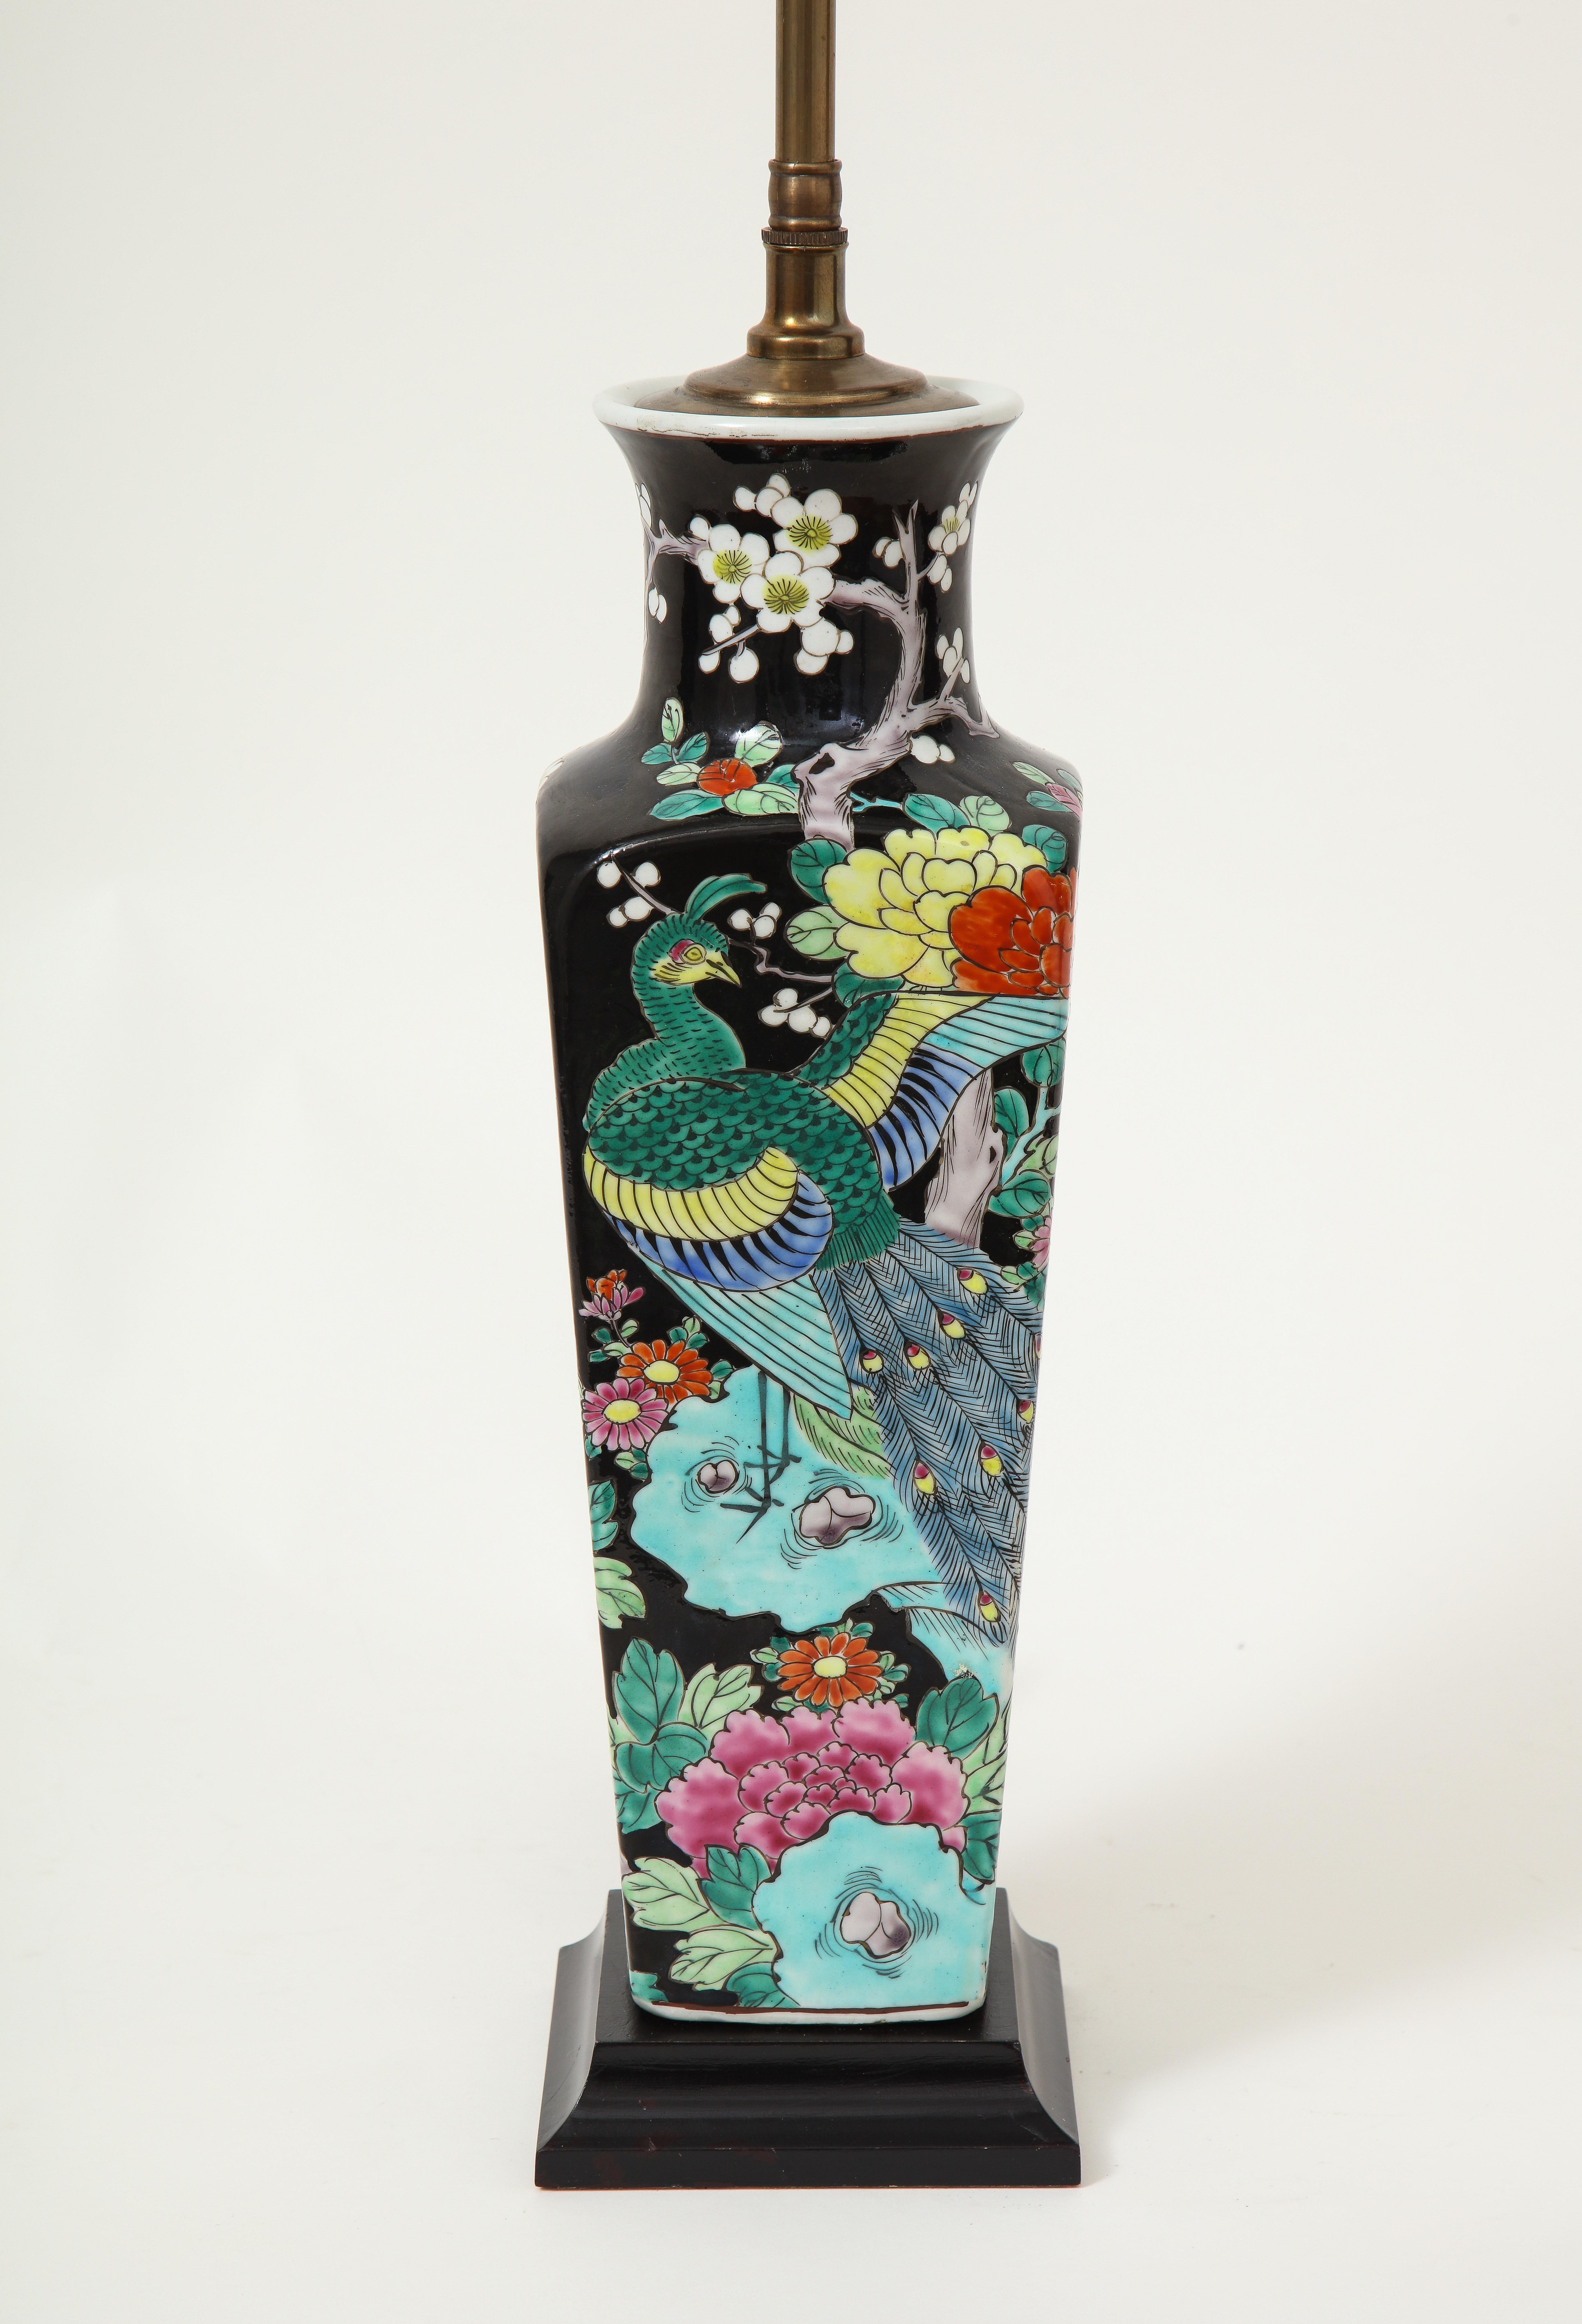 Of square tapering form; decorated with a peacock and tree peony branch in a bold polychrome palette; mounted on a black wood square base. Fitted with a brass adjustable rod and two moveable bulb sockets. Height to top of vase is 15.5 inches.